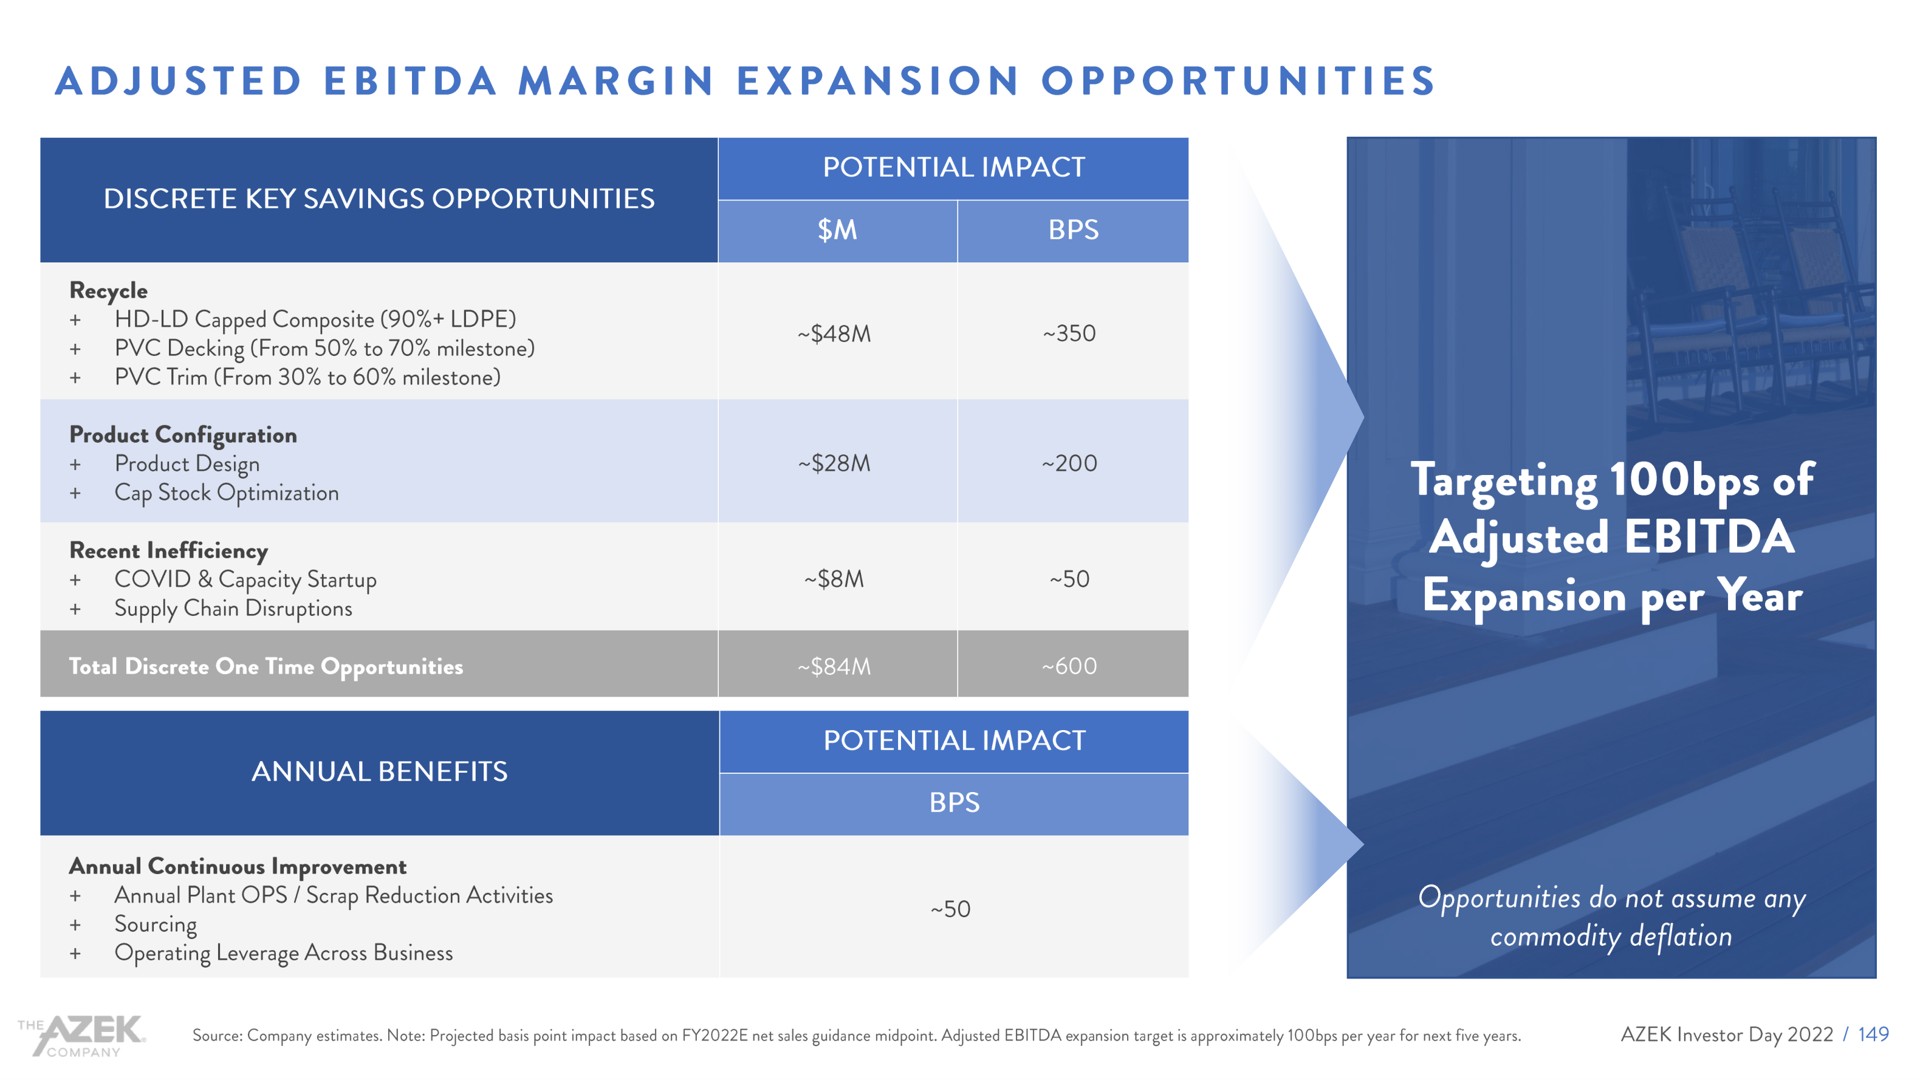 adjusted margin expansion opportunities stock recent inefficiency targeting of adjusted expansion per year | Azek